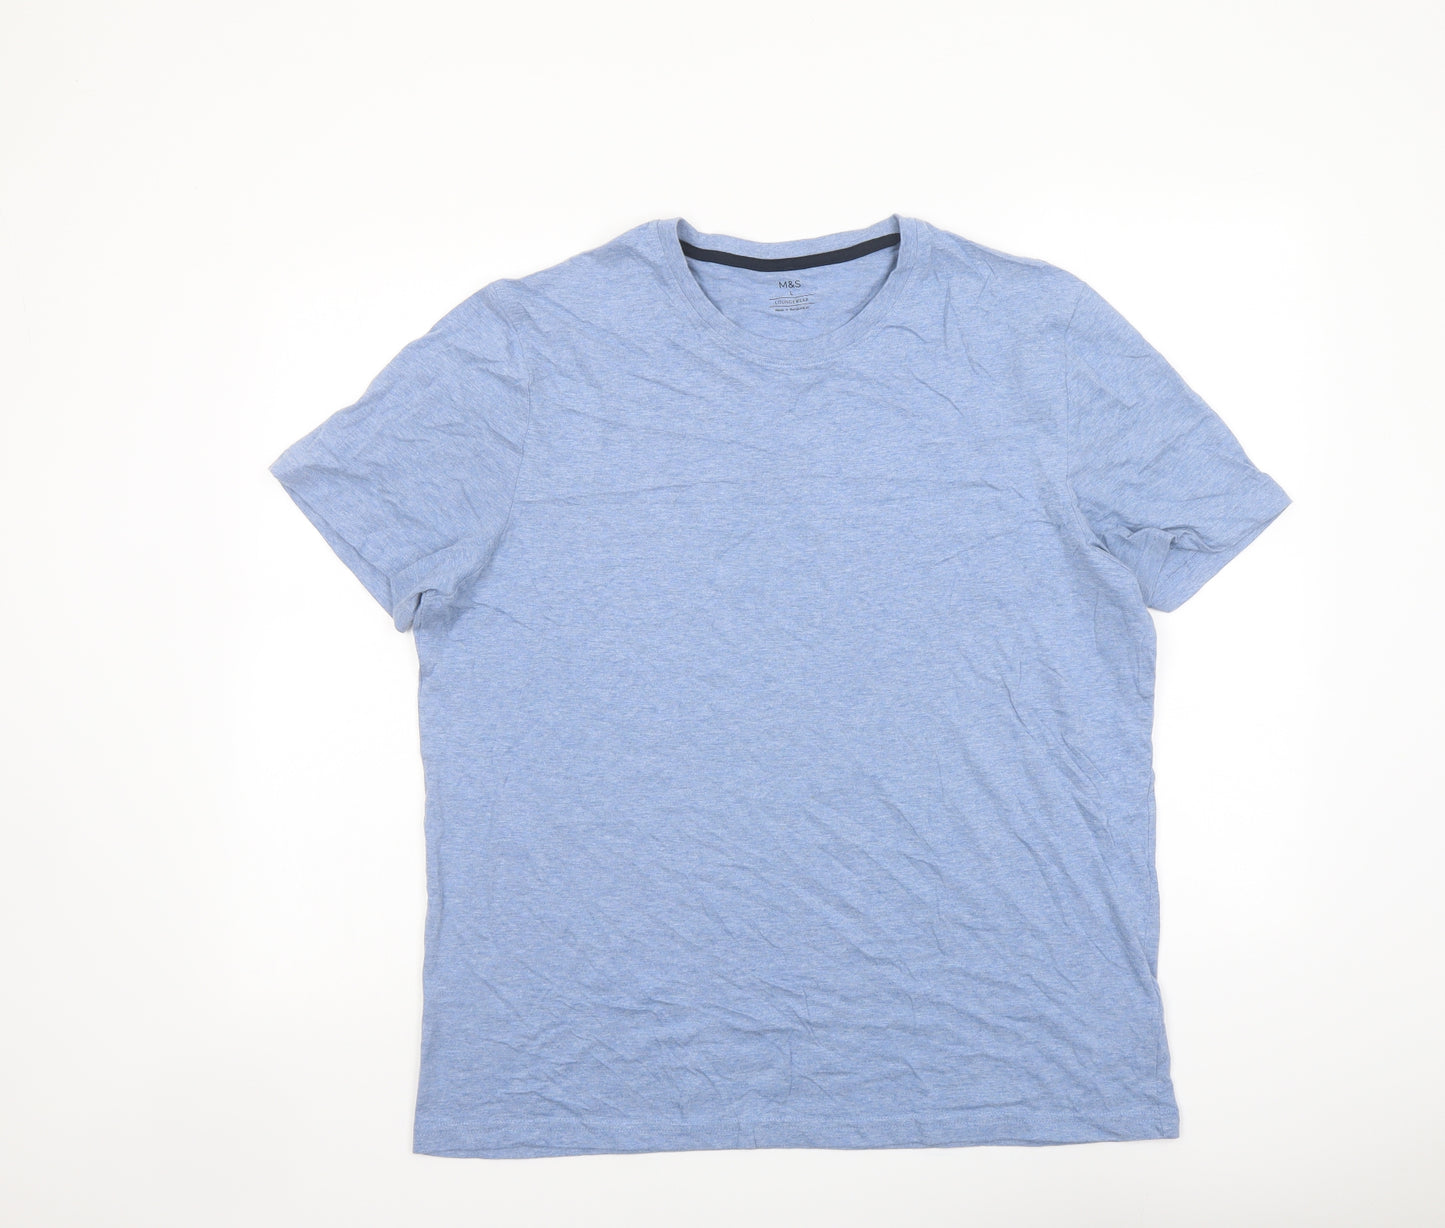 Marks and Spencer Mens Blue Cotton T-Shirt Size L Crew Neck